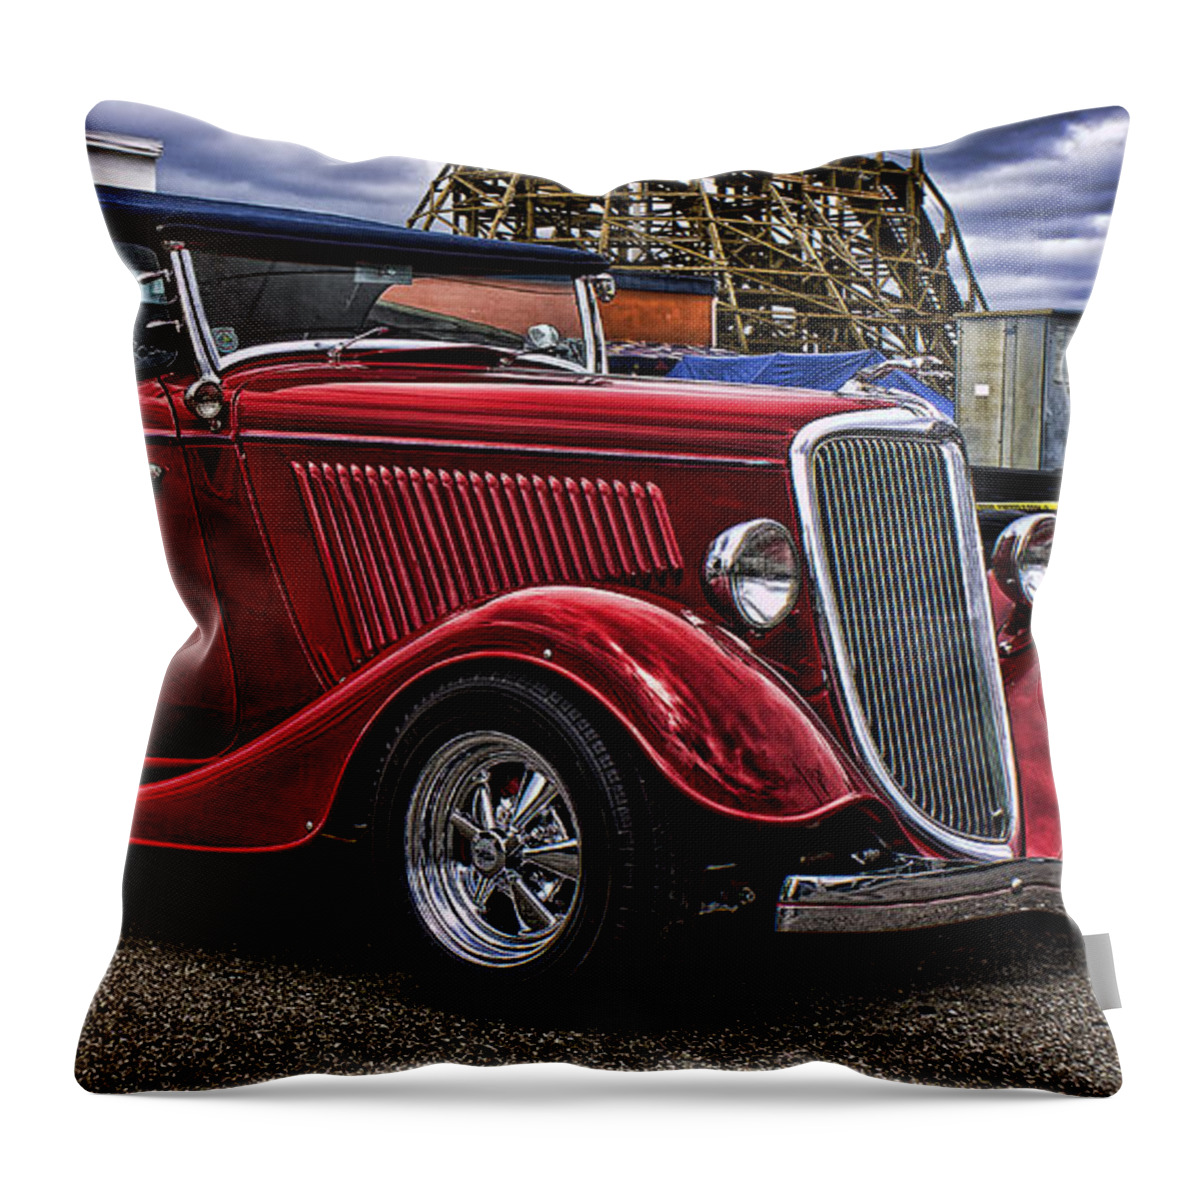 Hot Rod Throw Pillow featuring the photograph Red Cabrolet by Ron Roberts